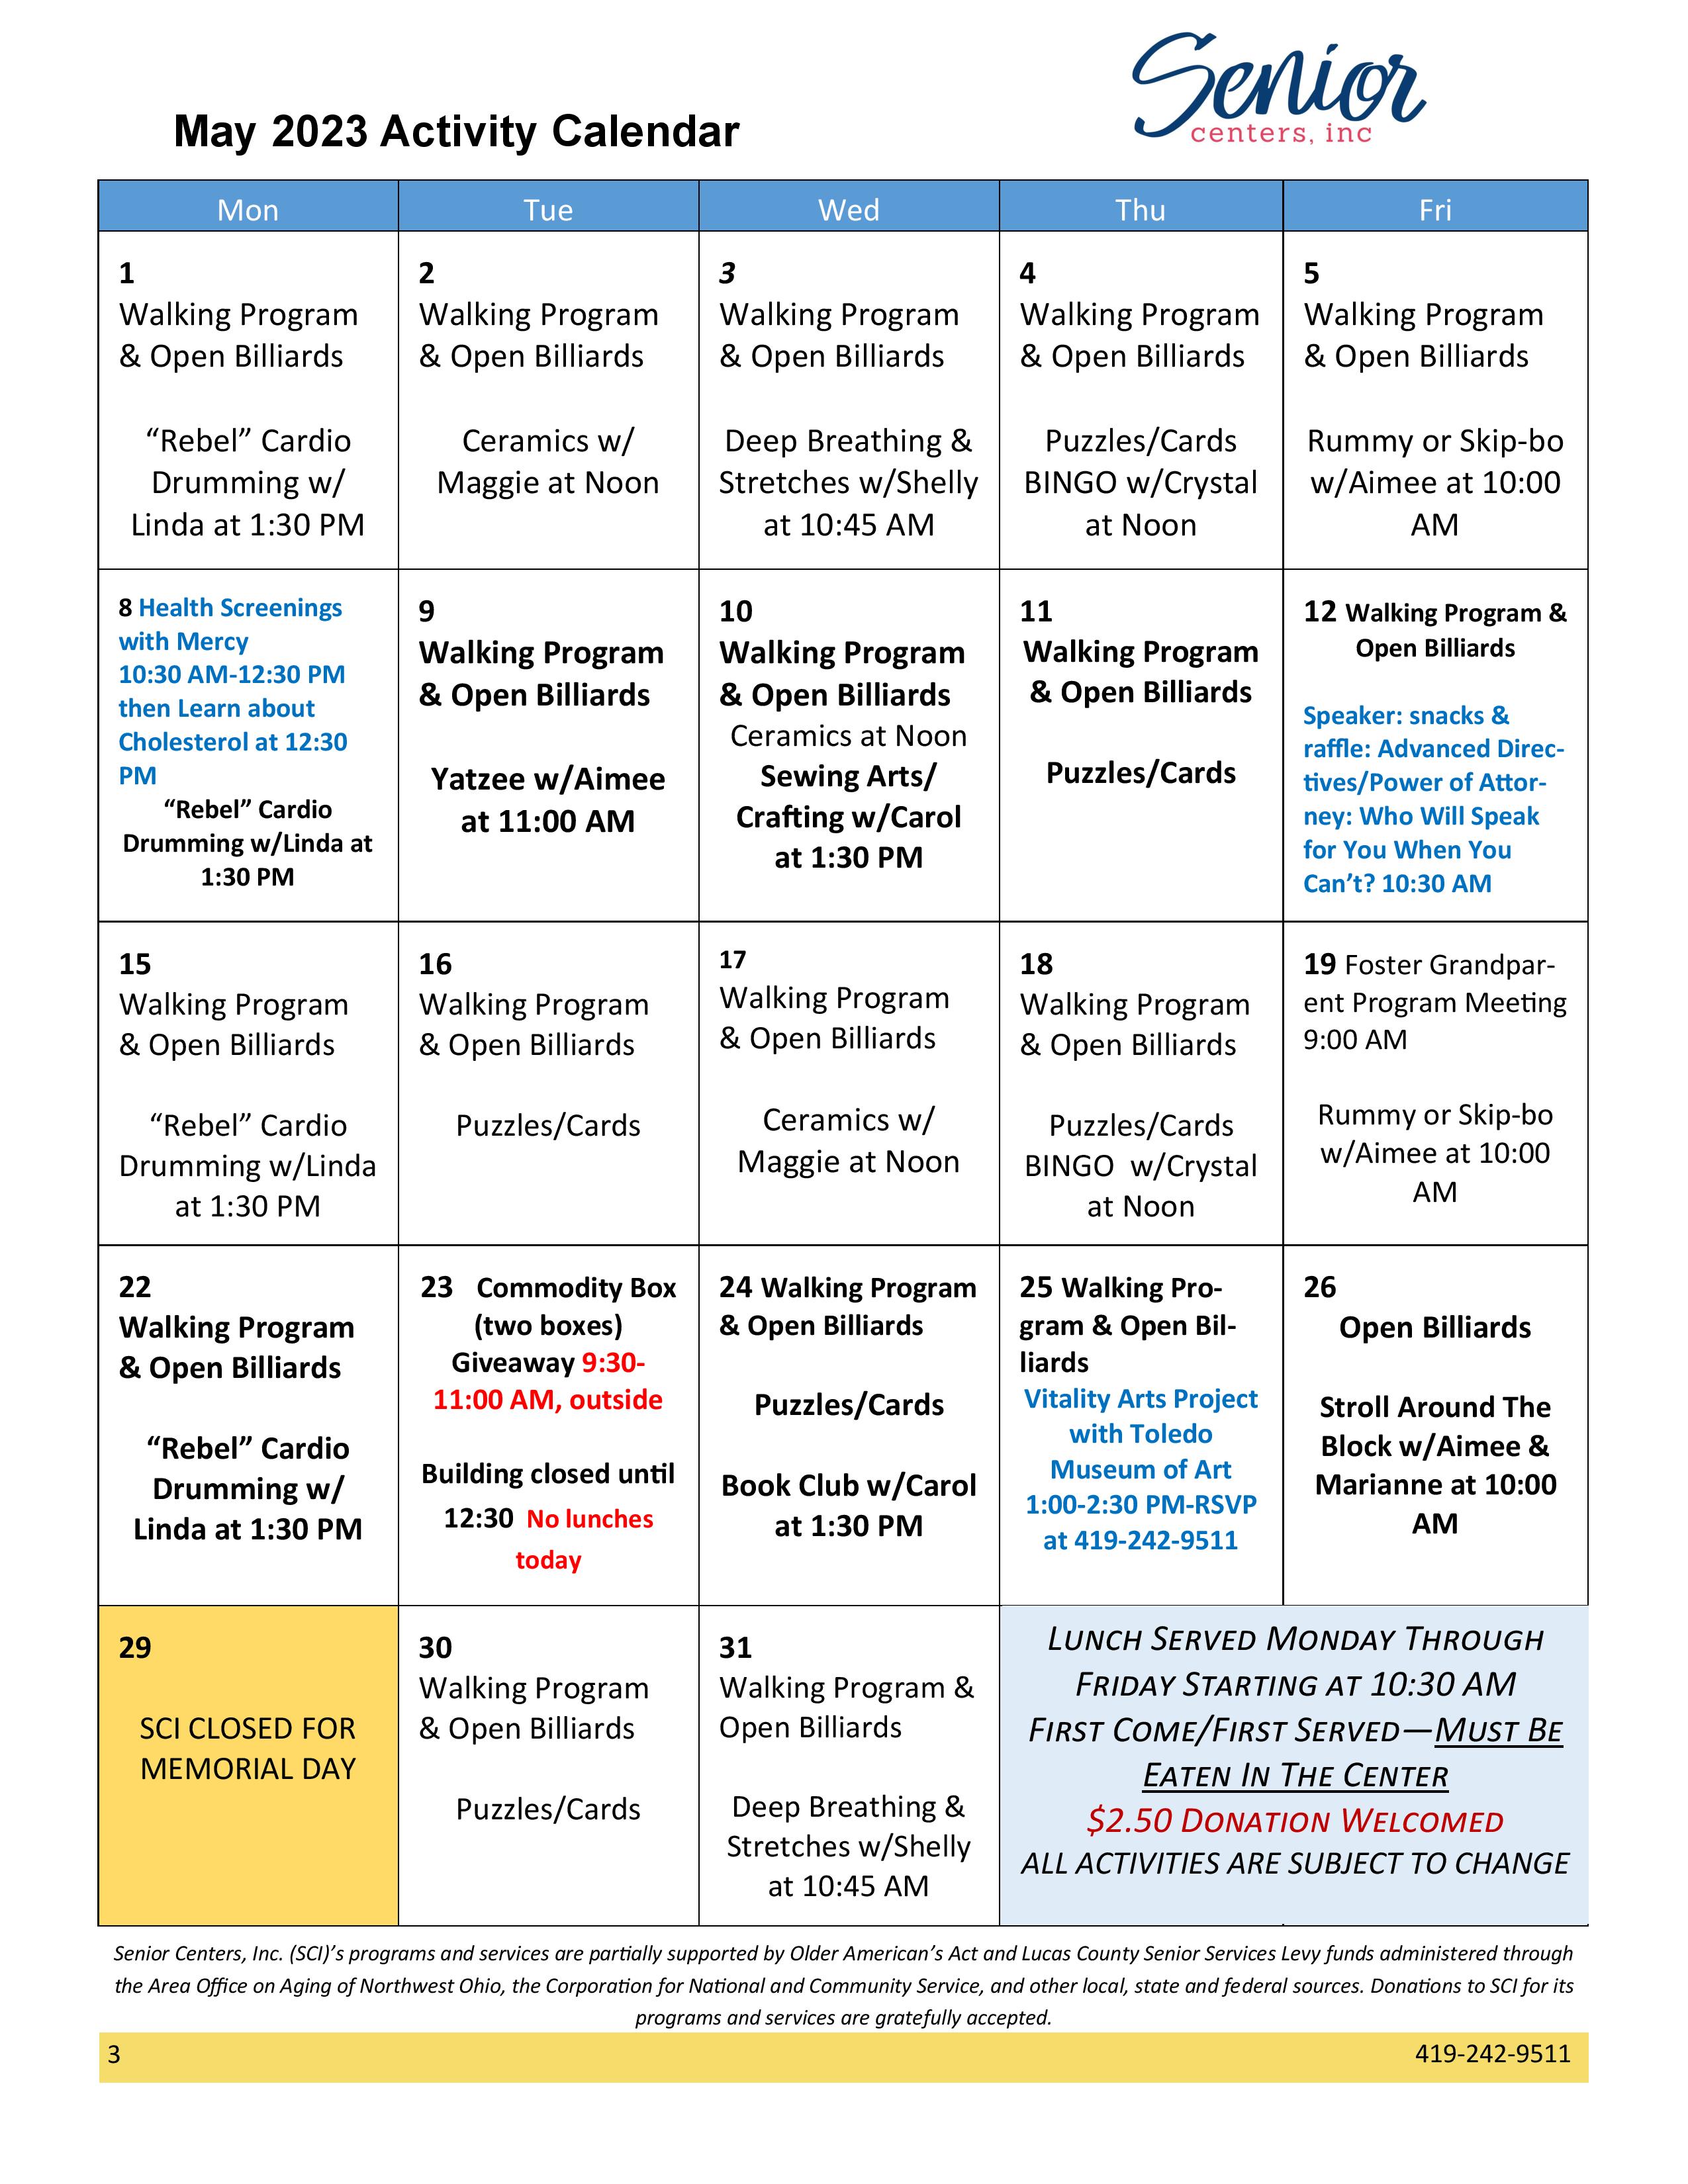 May 2023 Newsletter and Activity Calendar – Senior Centers, Inc.